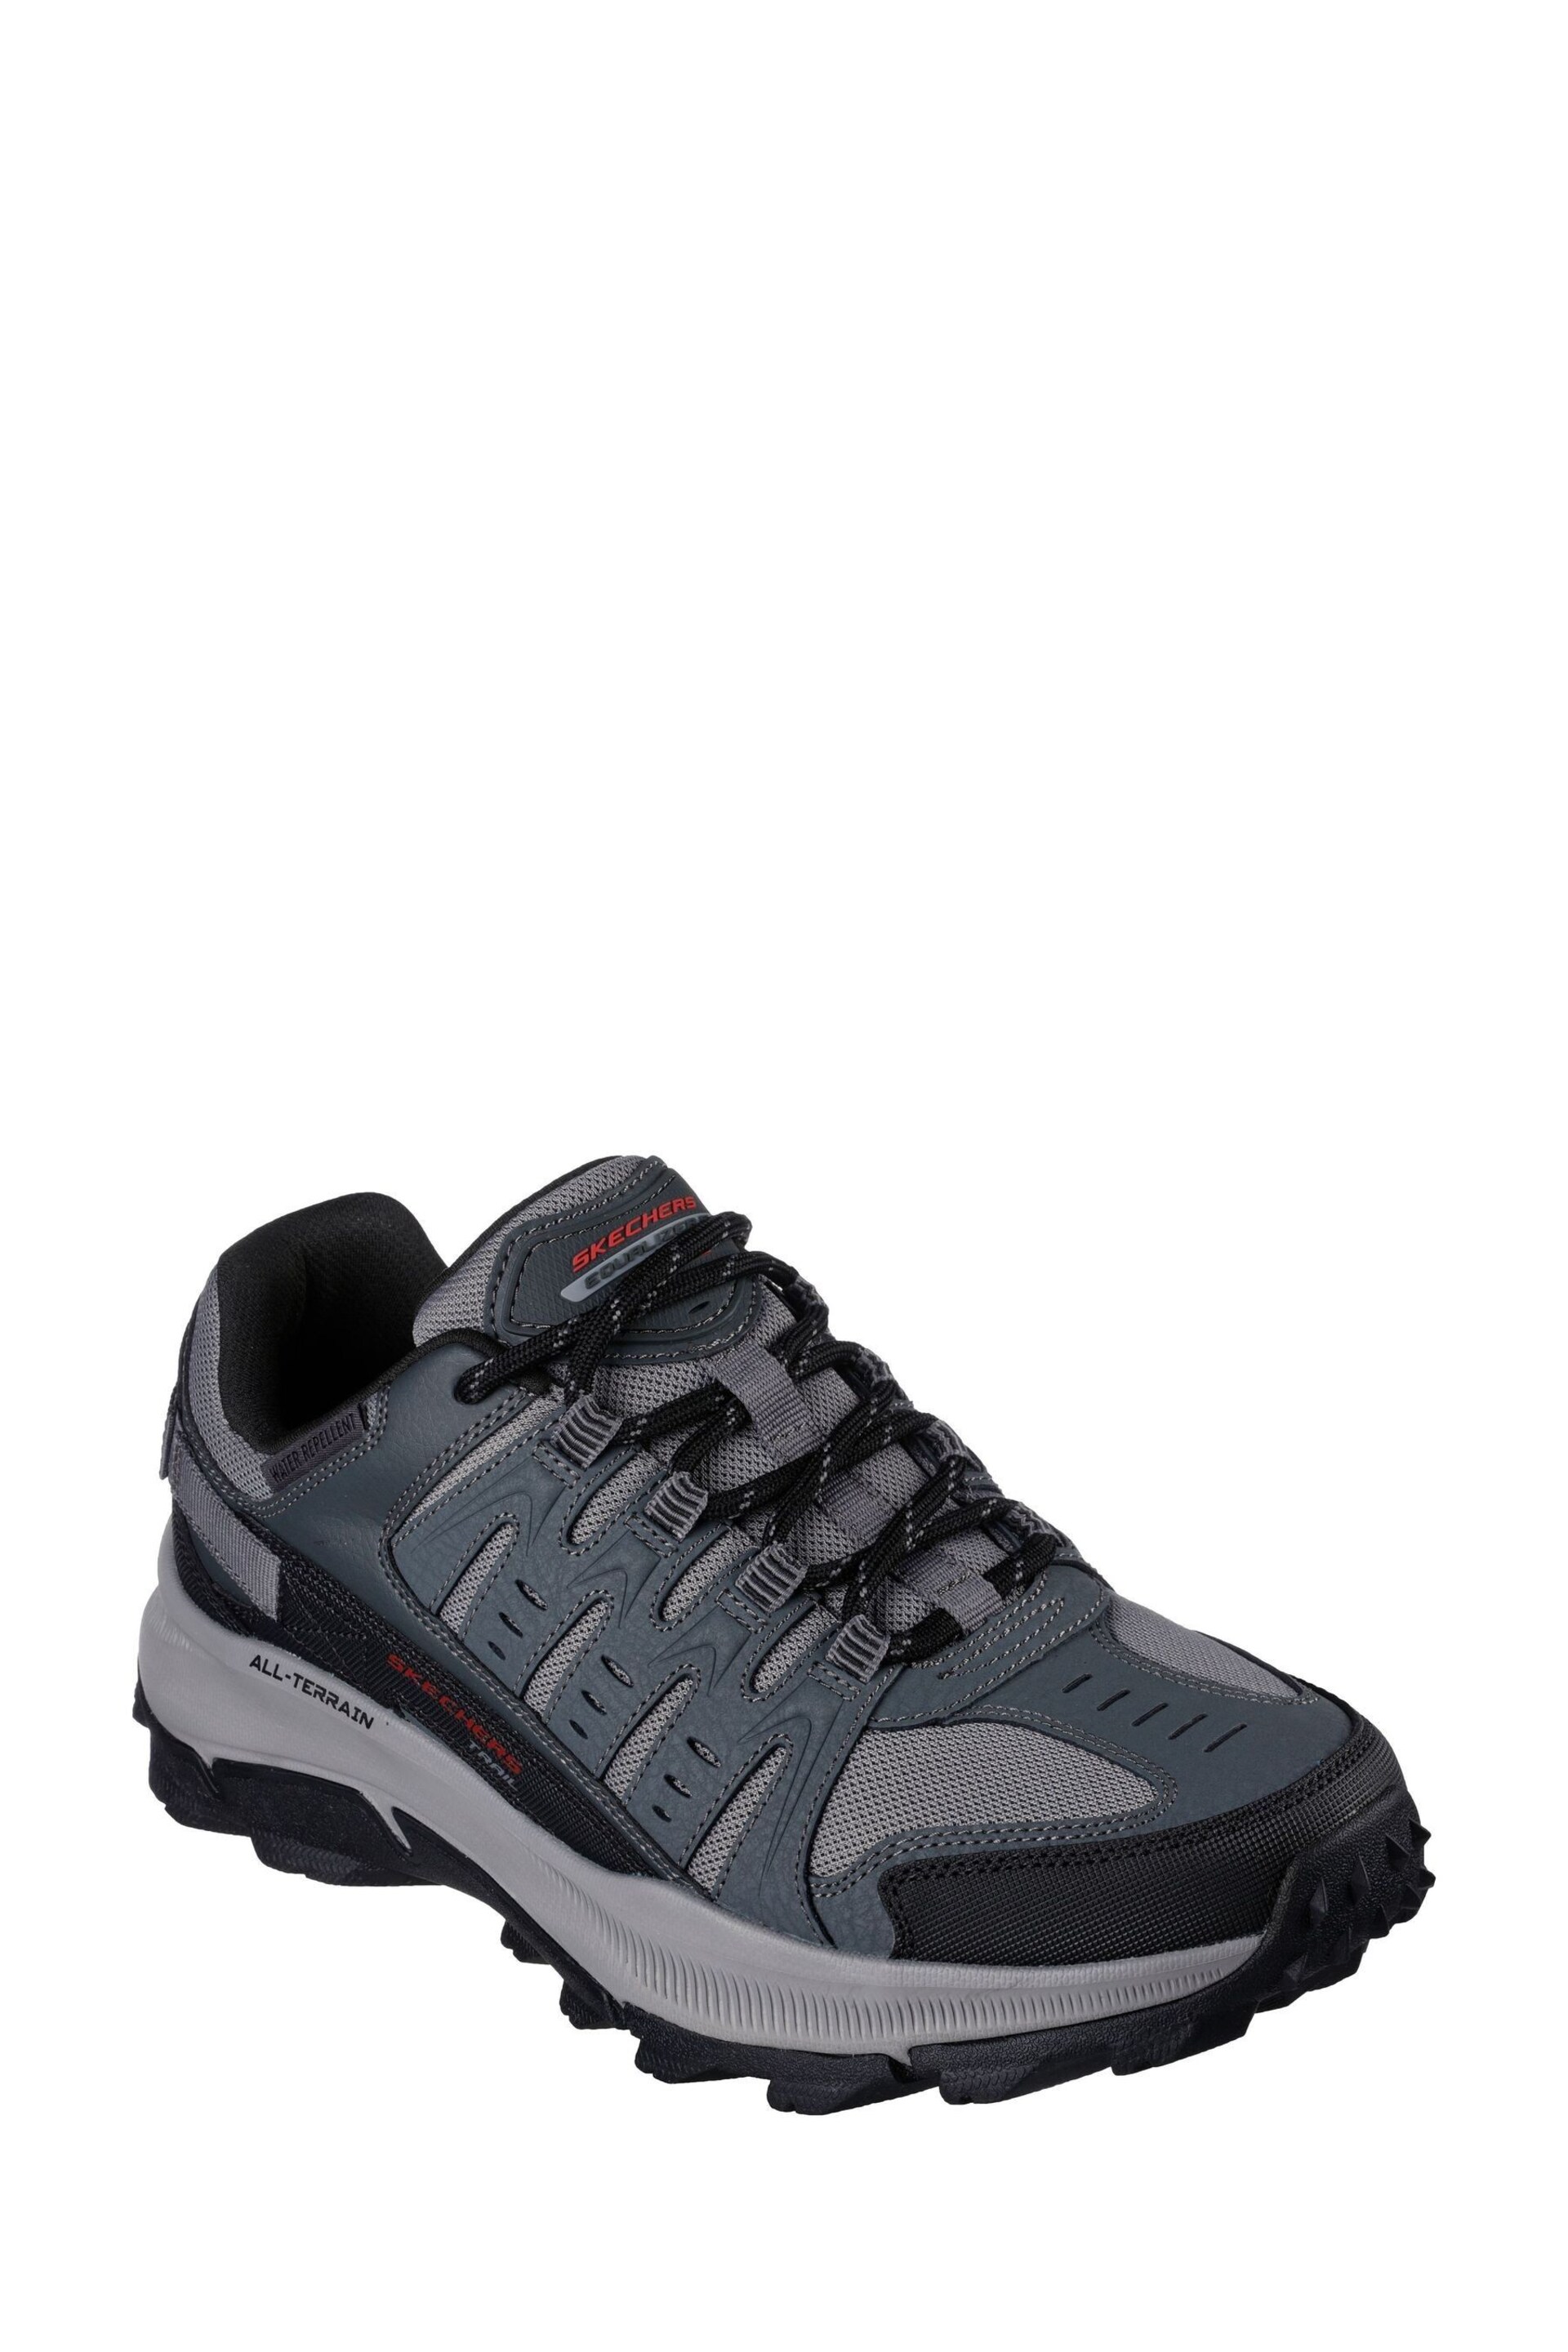 Skechers Grey Equalizer 5.0 Solix Trail Running Trainers - Image 3 of 5